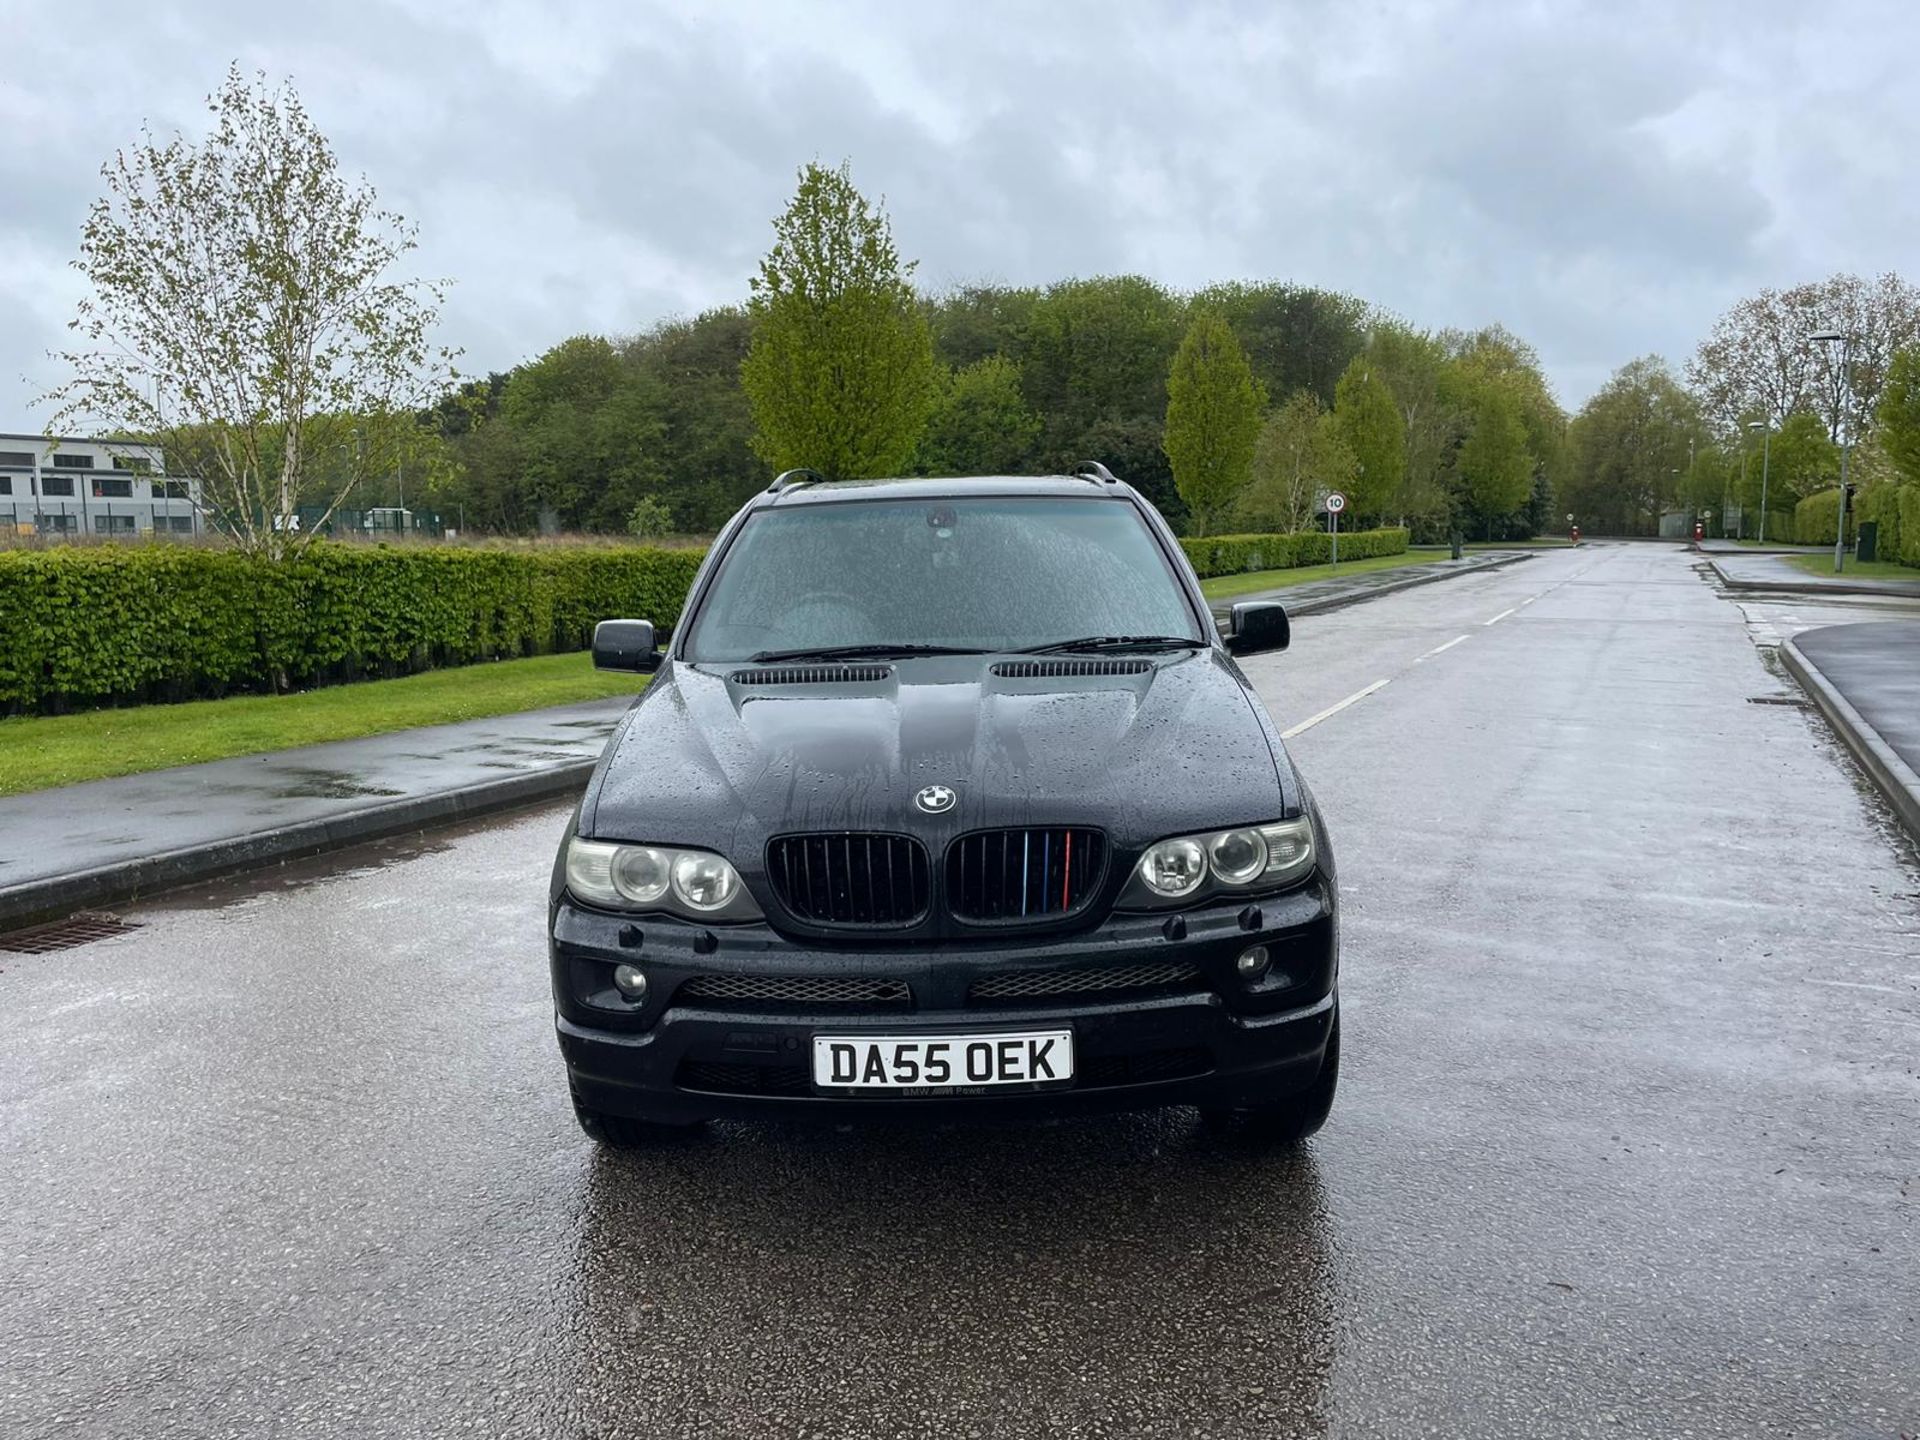 2005/55 REG BMW X5 SPORT DIESEL 3.0 AUTOMATIC, SHOWING 2 FORMER KEEPERS *NO VAT* - Image 2 of 19